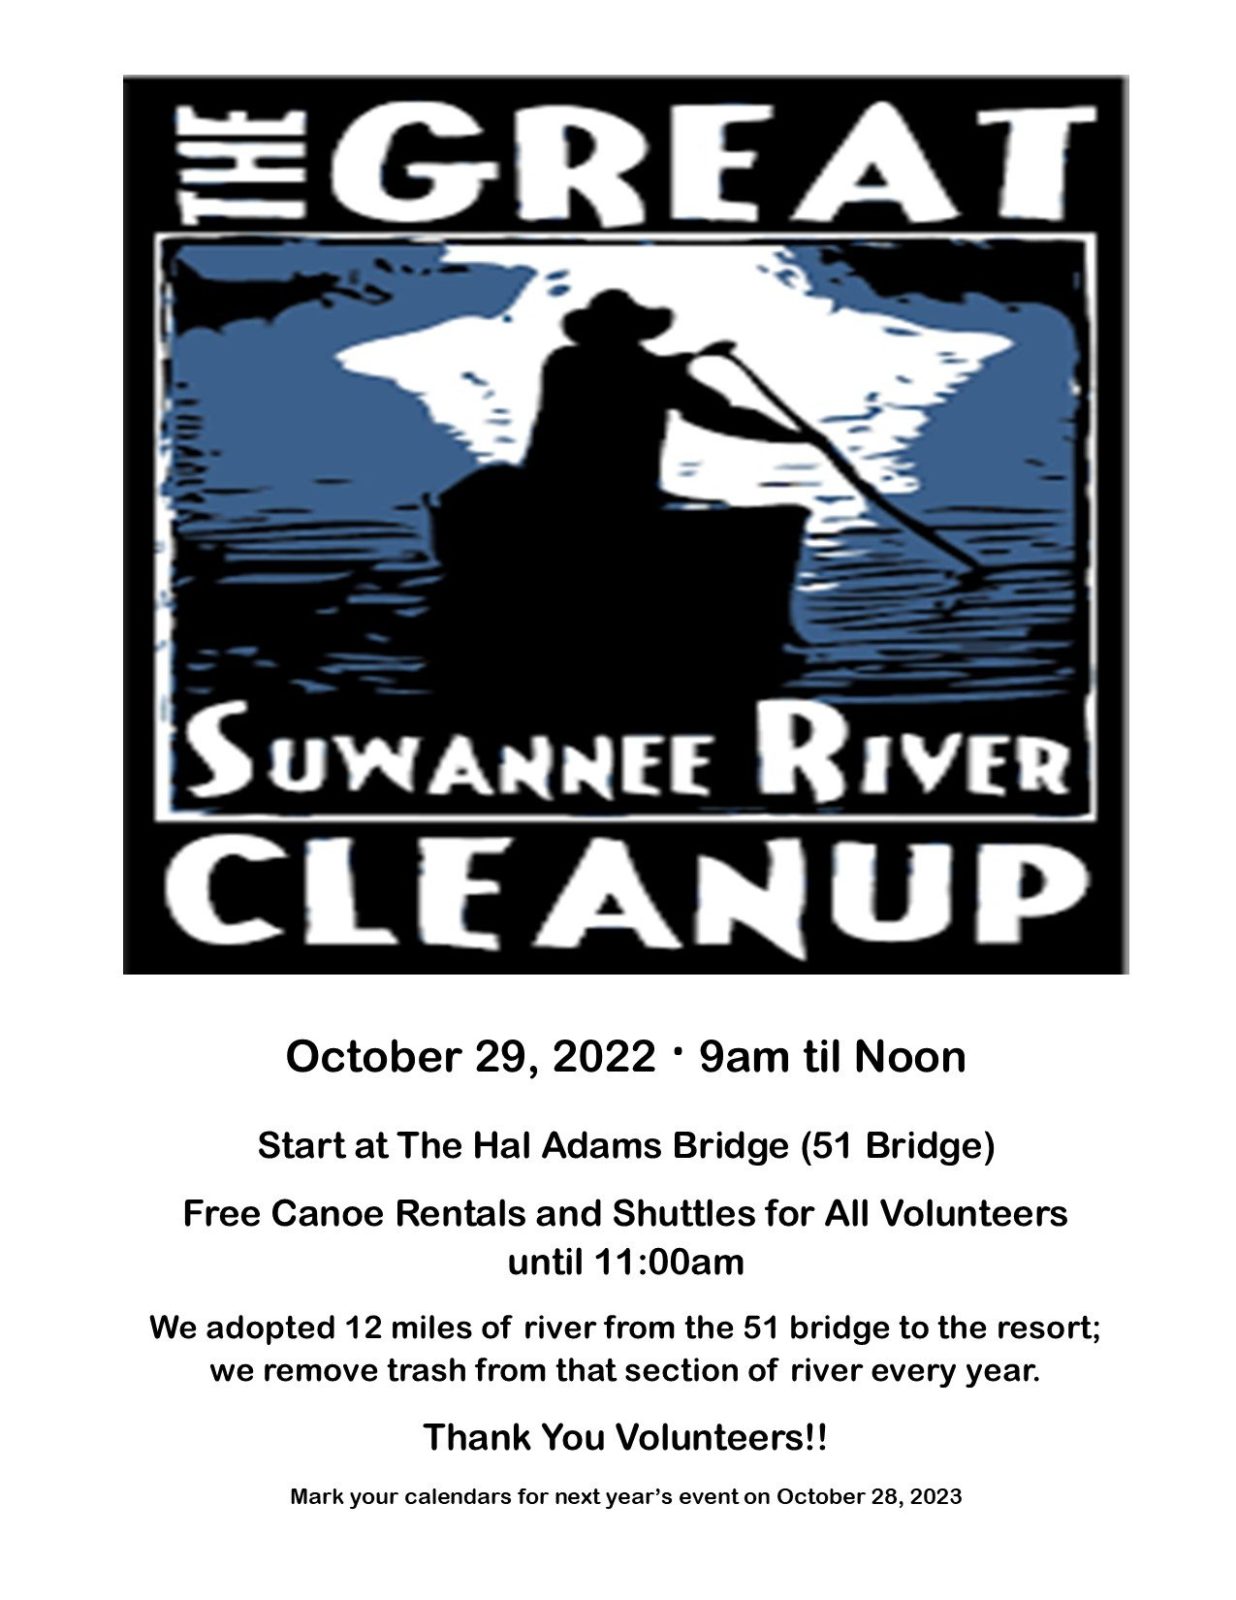 The Great Suwannee River Cleanup